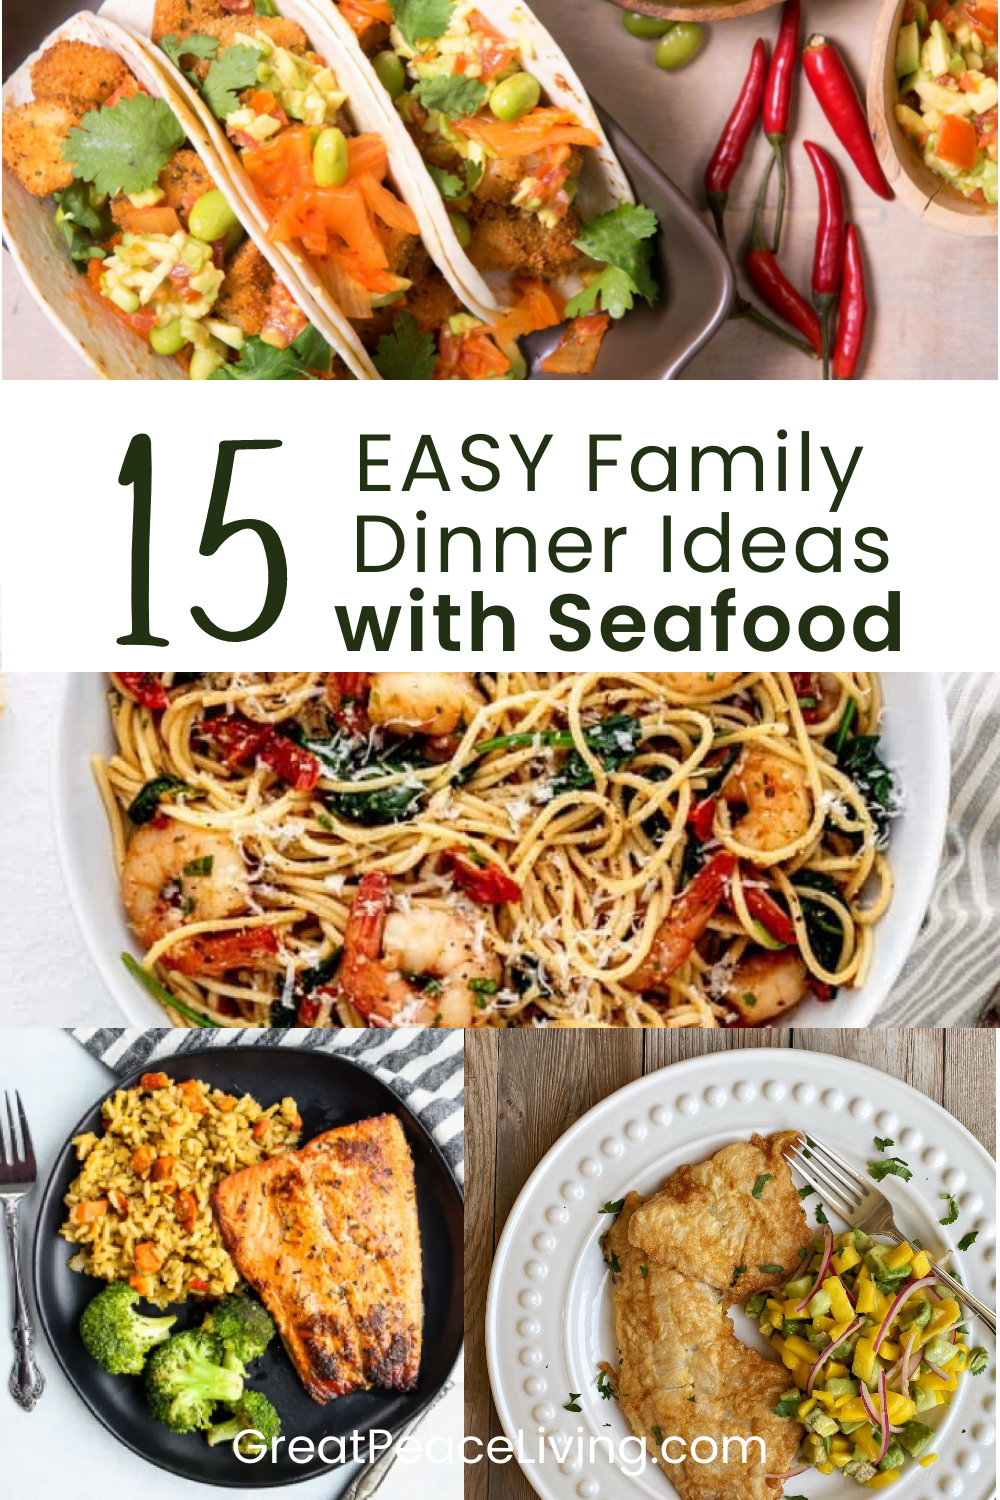 Easy Family Dinner Ideas with Seafood